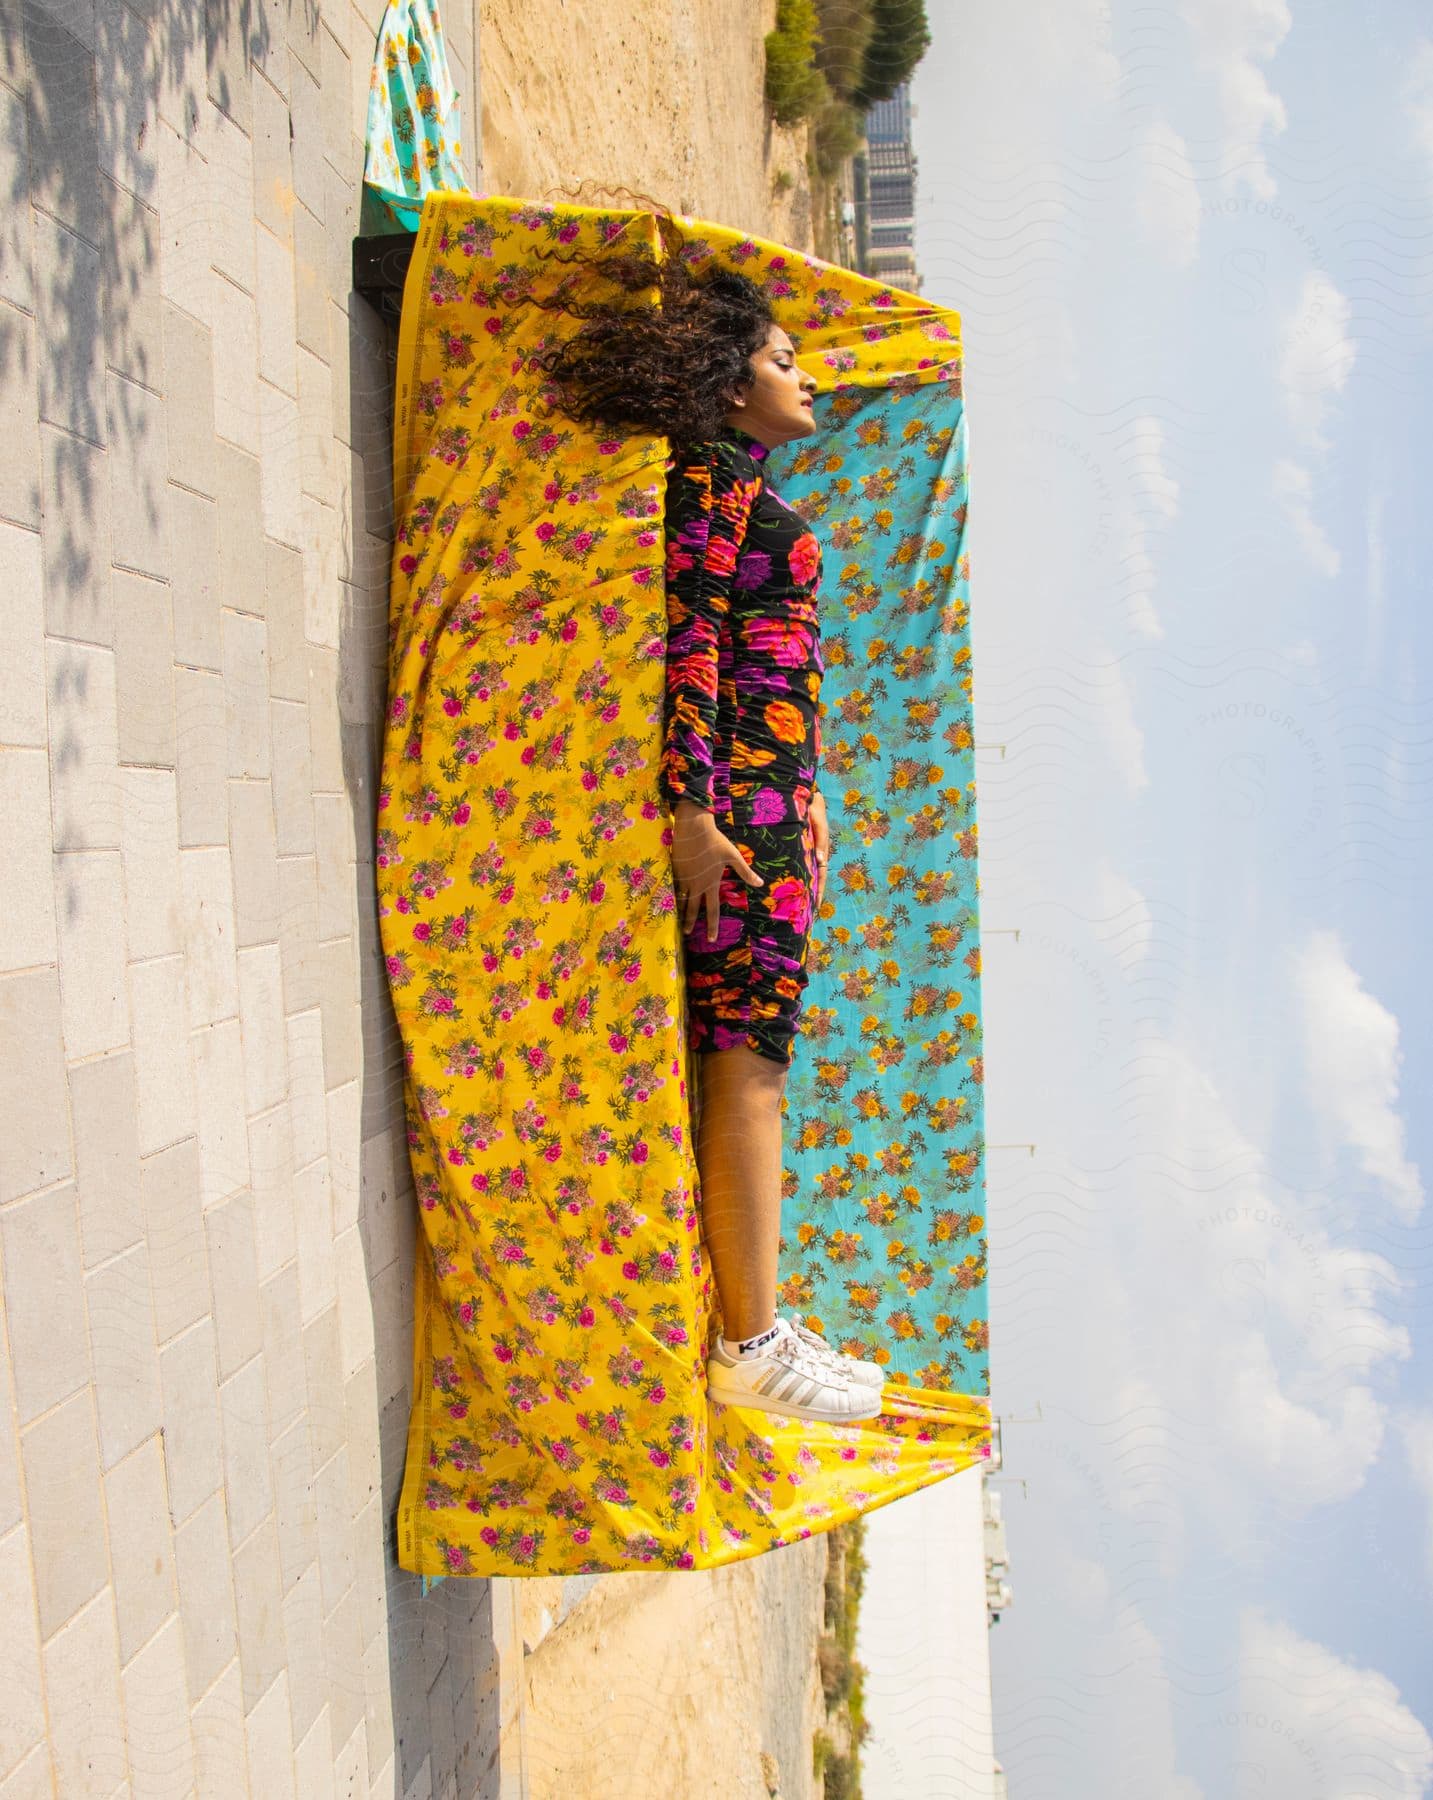 Woman relaxes lying on a bench patterned with yellow and blue floral fabrics outdoors on a blue sky day.